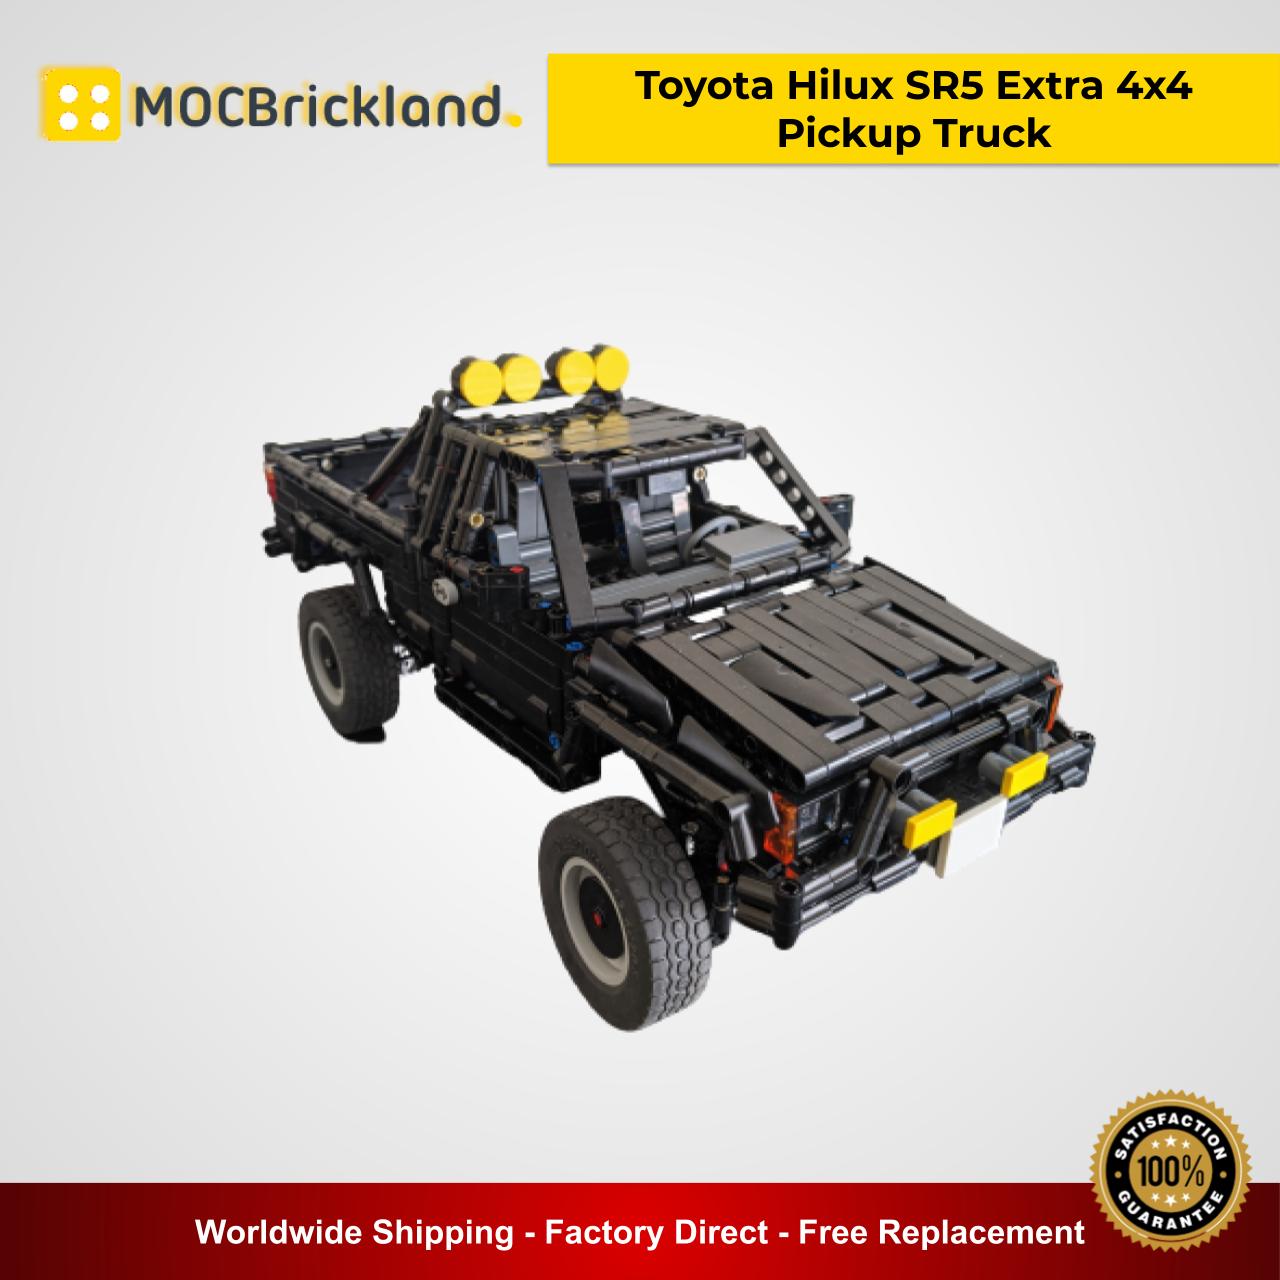 Toyota Hilux SR5 Extra 4x4 Pickup Truck MOC 43124 Technic - Back To The Future Movie Designed By RM8 BrickGarage